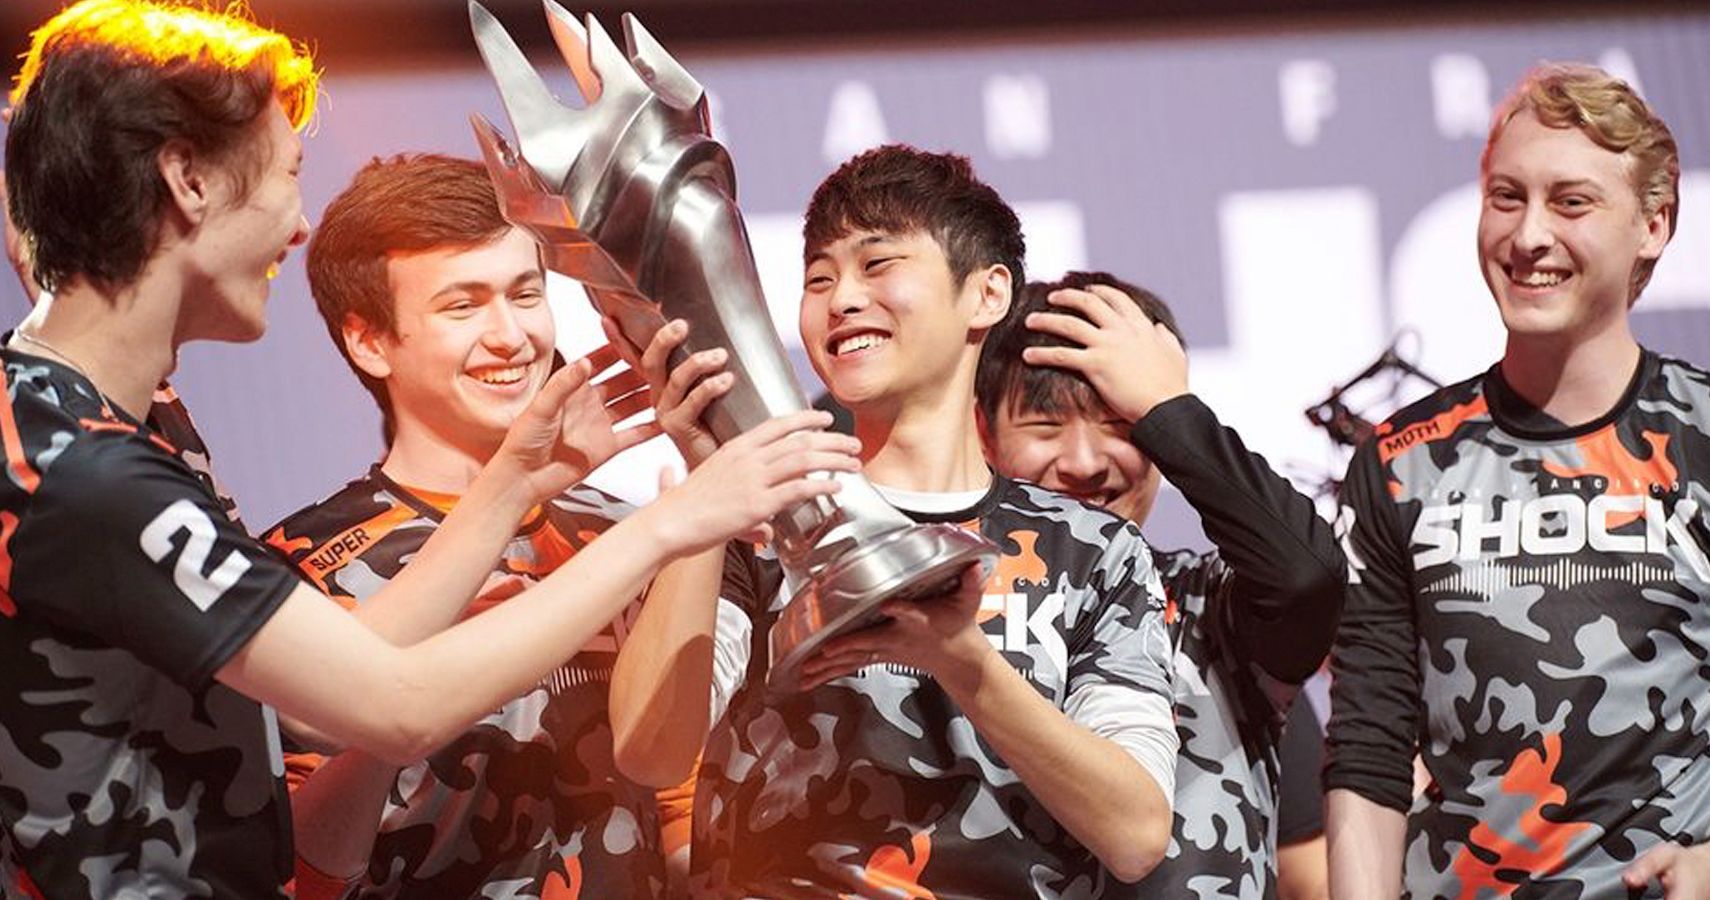 SF Shock hold a trophy after winning the 2019 Overwatch League Grand Finals Championship.